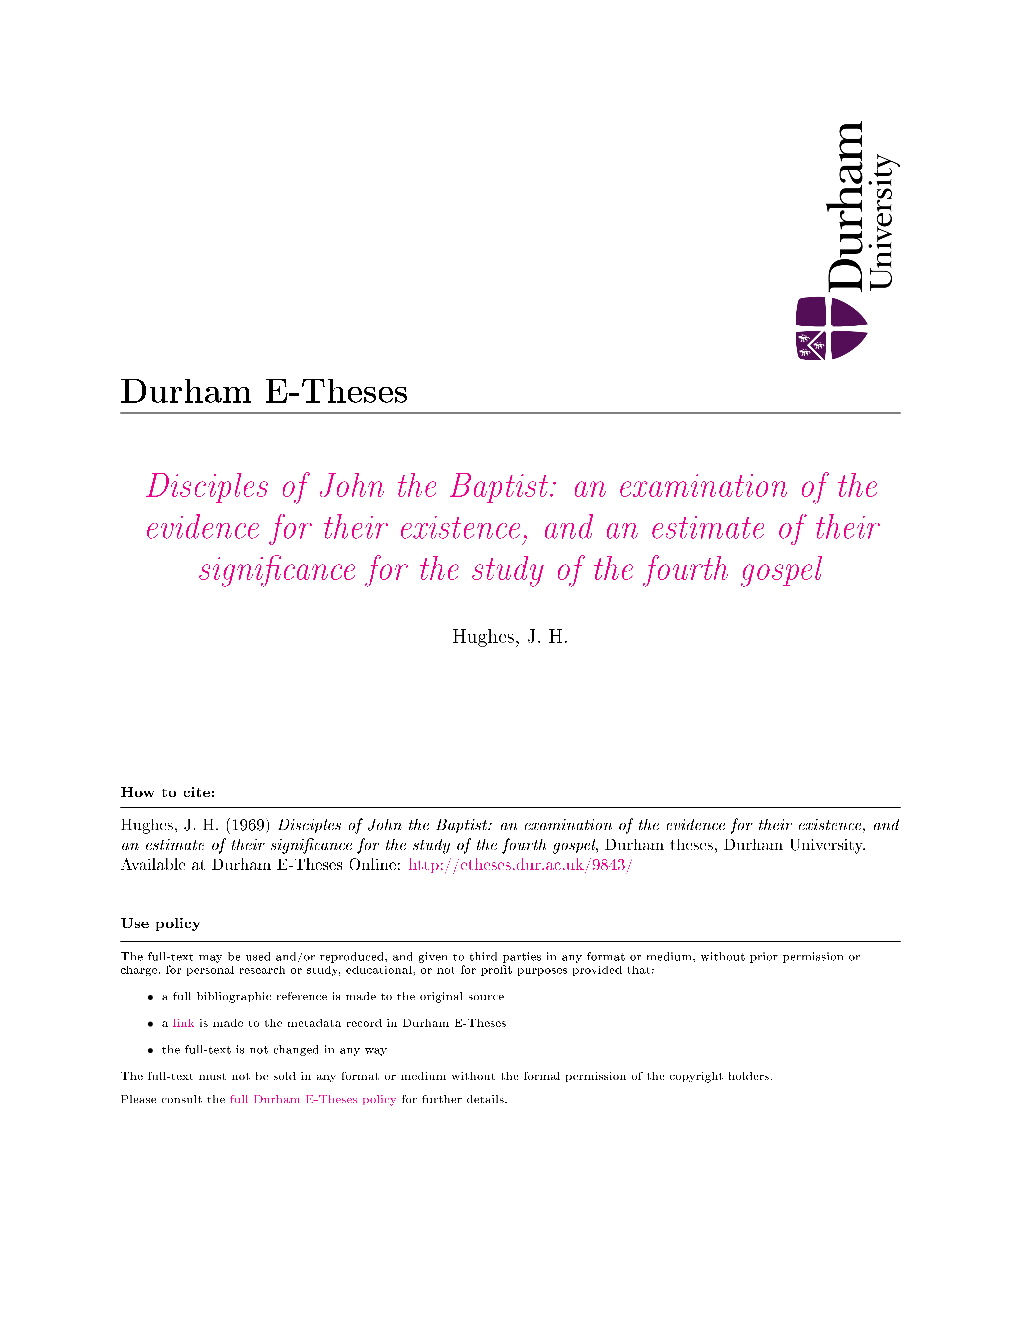 Disciples of John the Baptist: an Examination of the Evidence for Their Existence, and an Estimate of Their Signi Cance for the Study of the Fourth Gospel